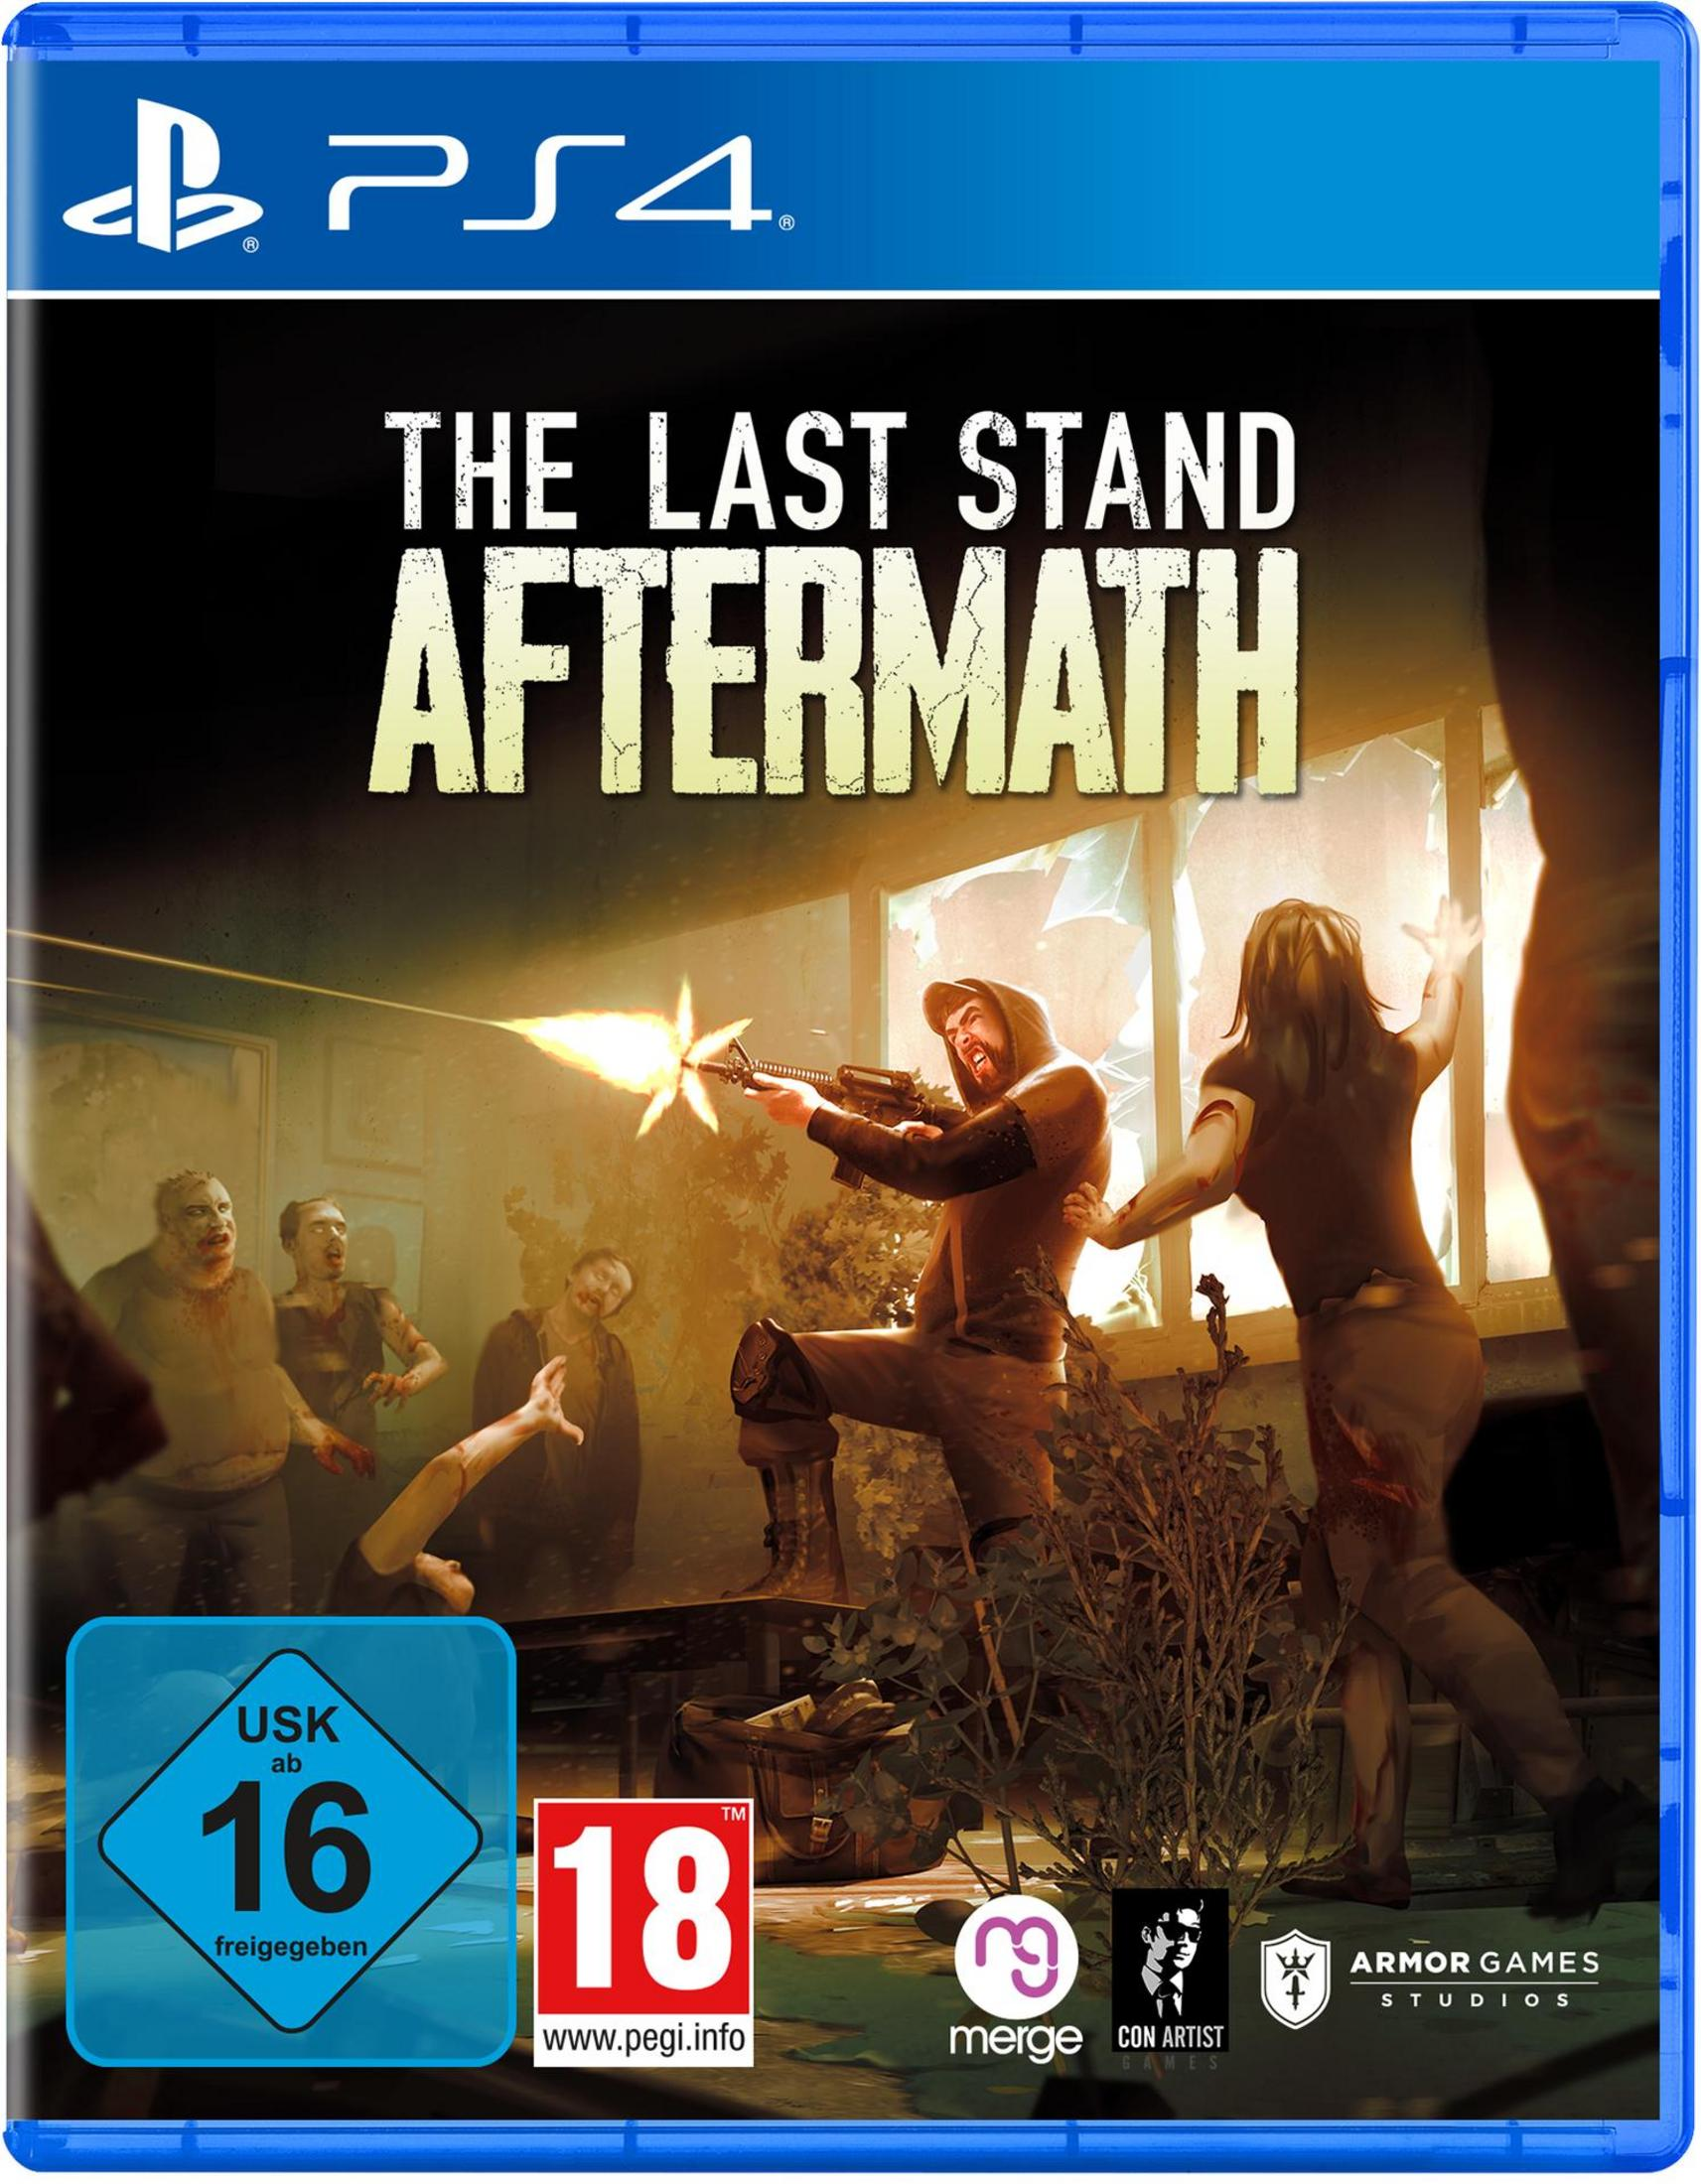 The Last Stand [PlayStation - Aftermath 4] 